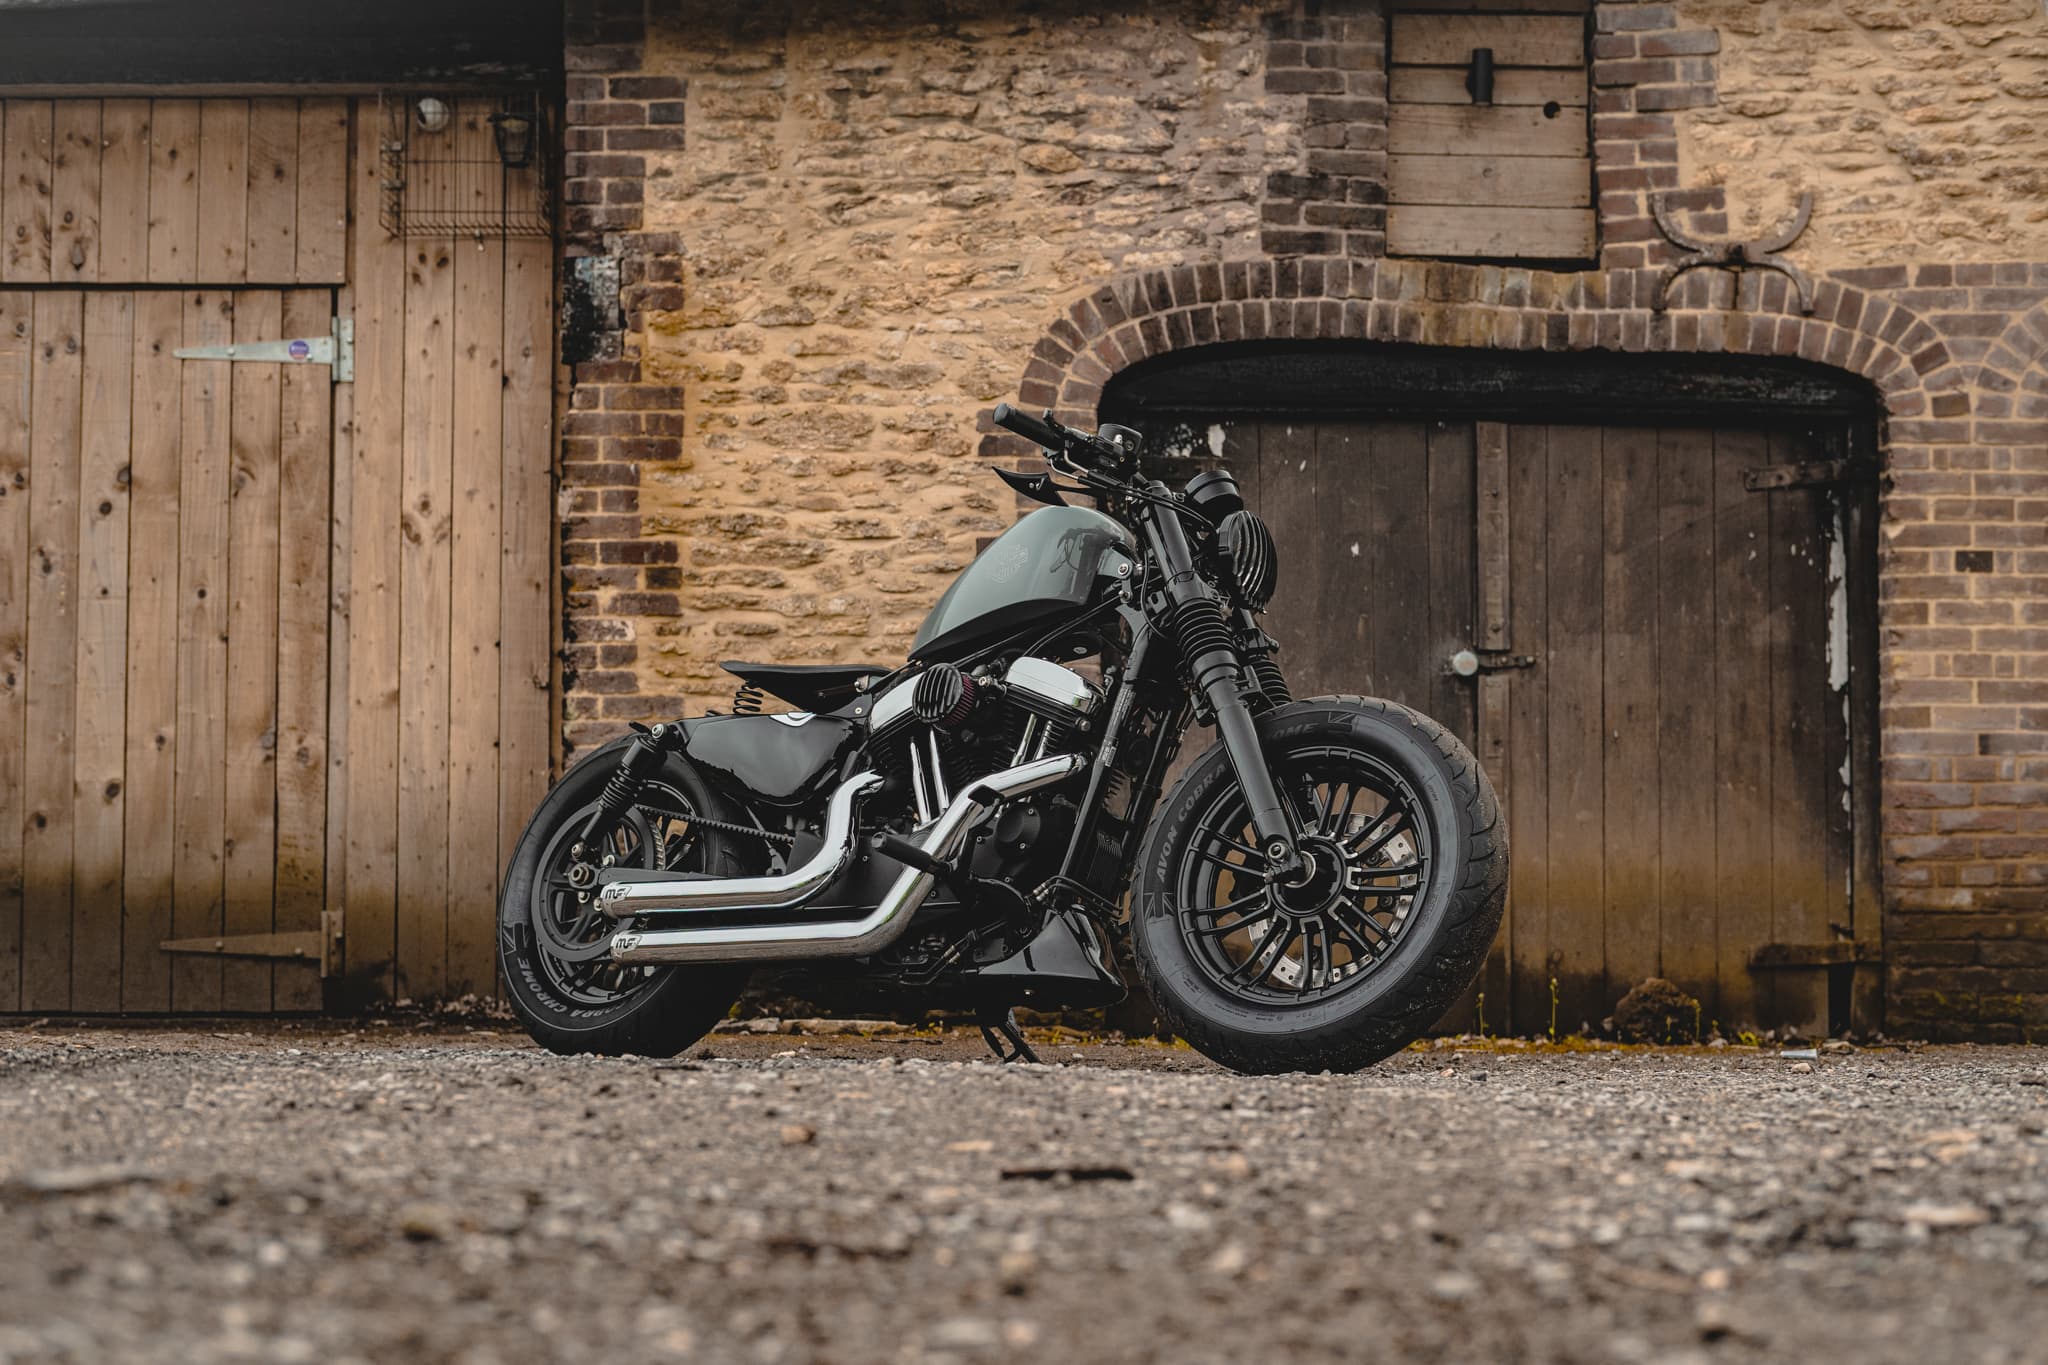 2015 Harley Davidson Sportster 48 by Norse Customs - 20th April